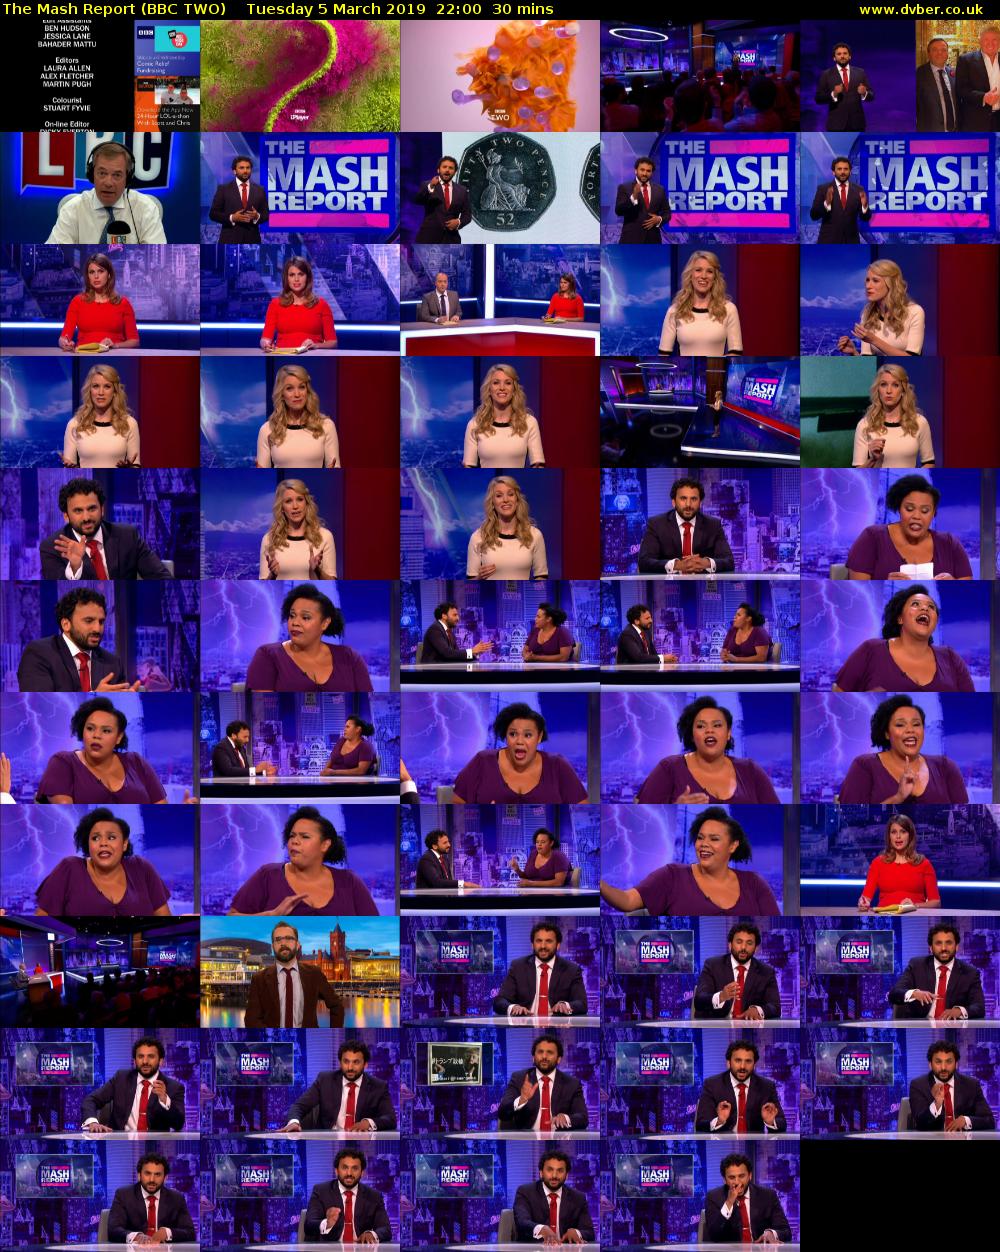 The Mash Report (BBC TWO) Tuesday 5 March 2019 22:00 - 22:30